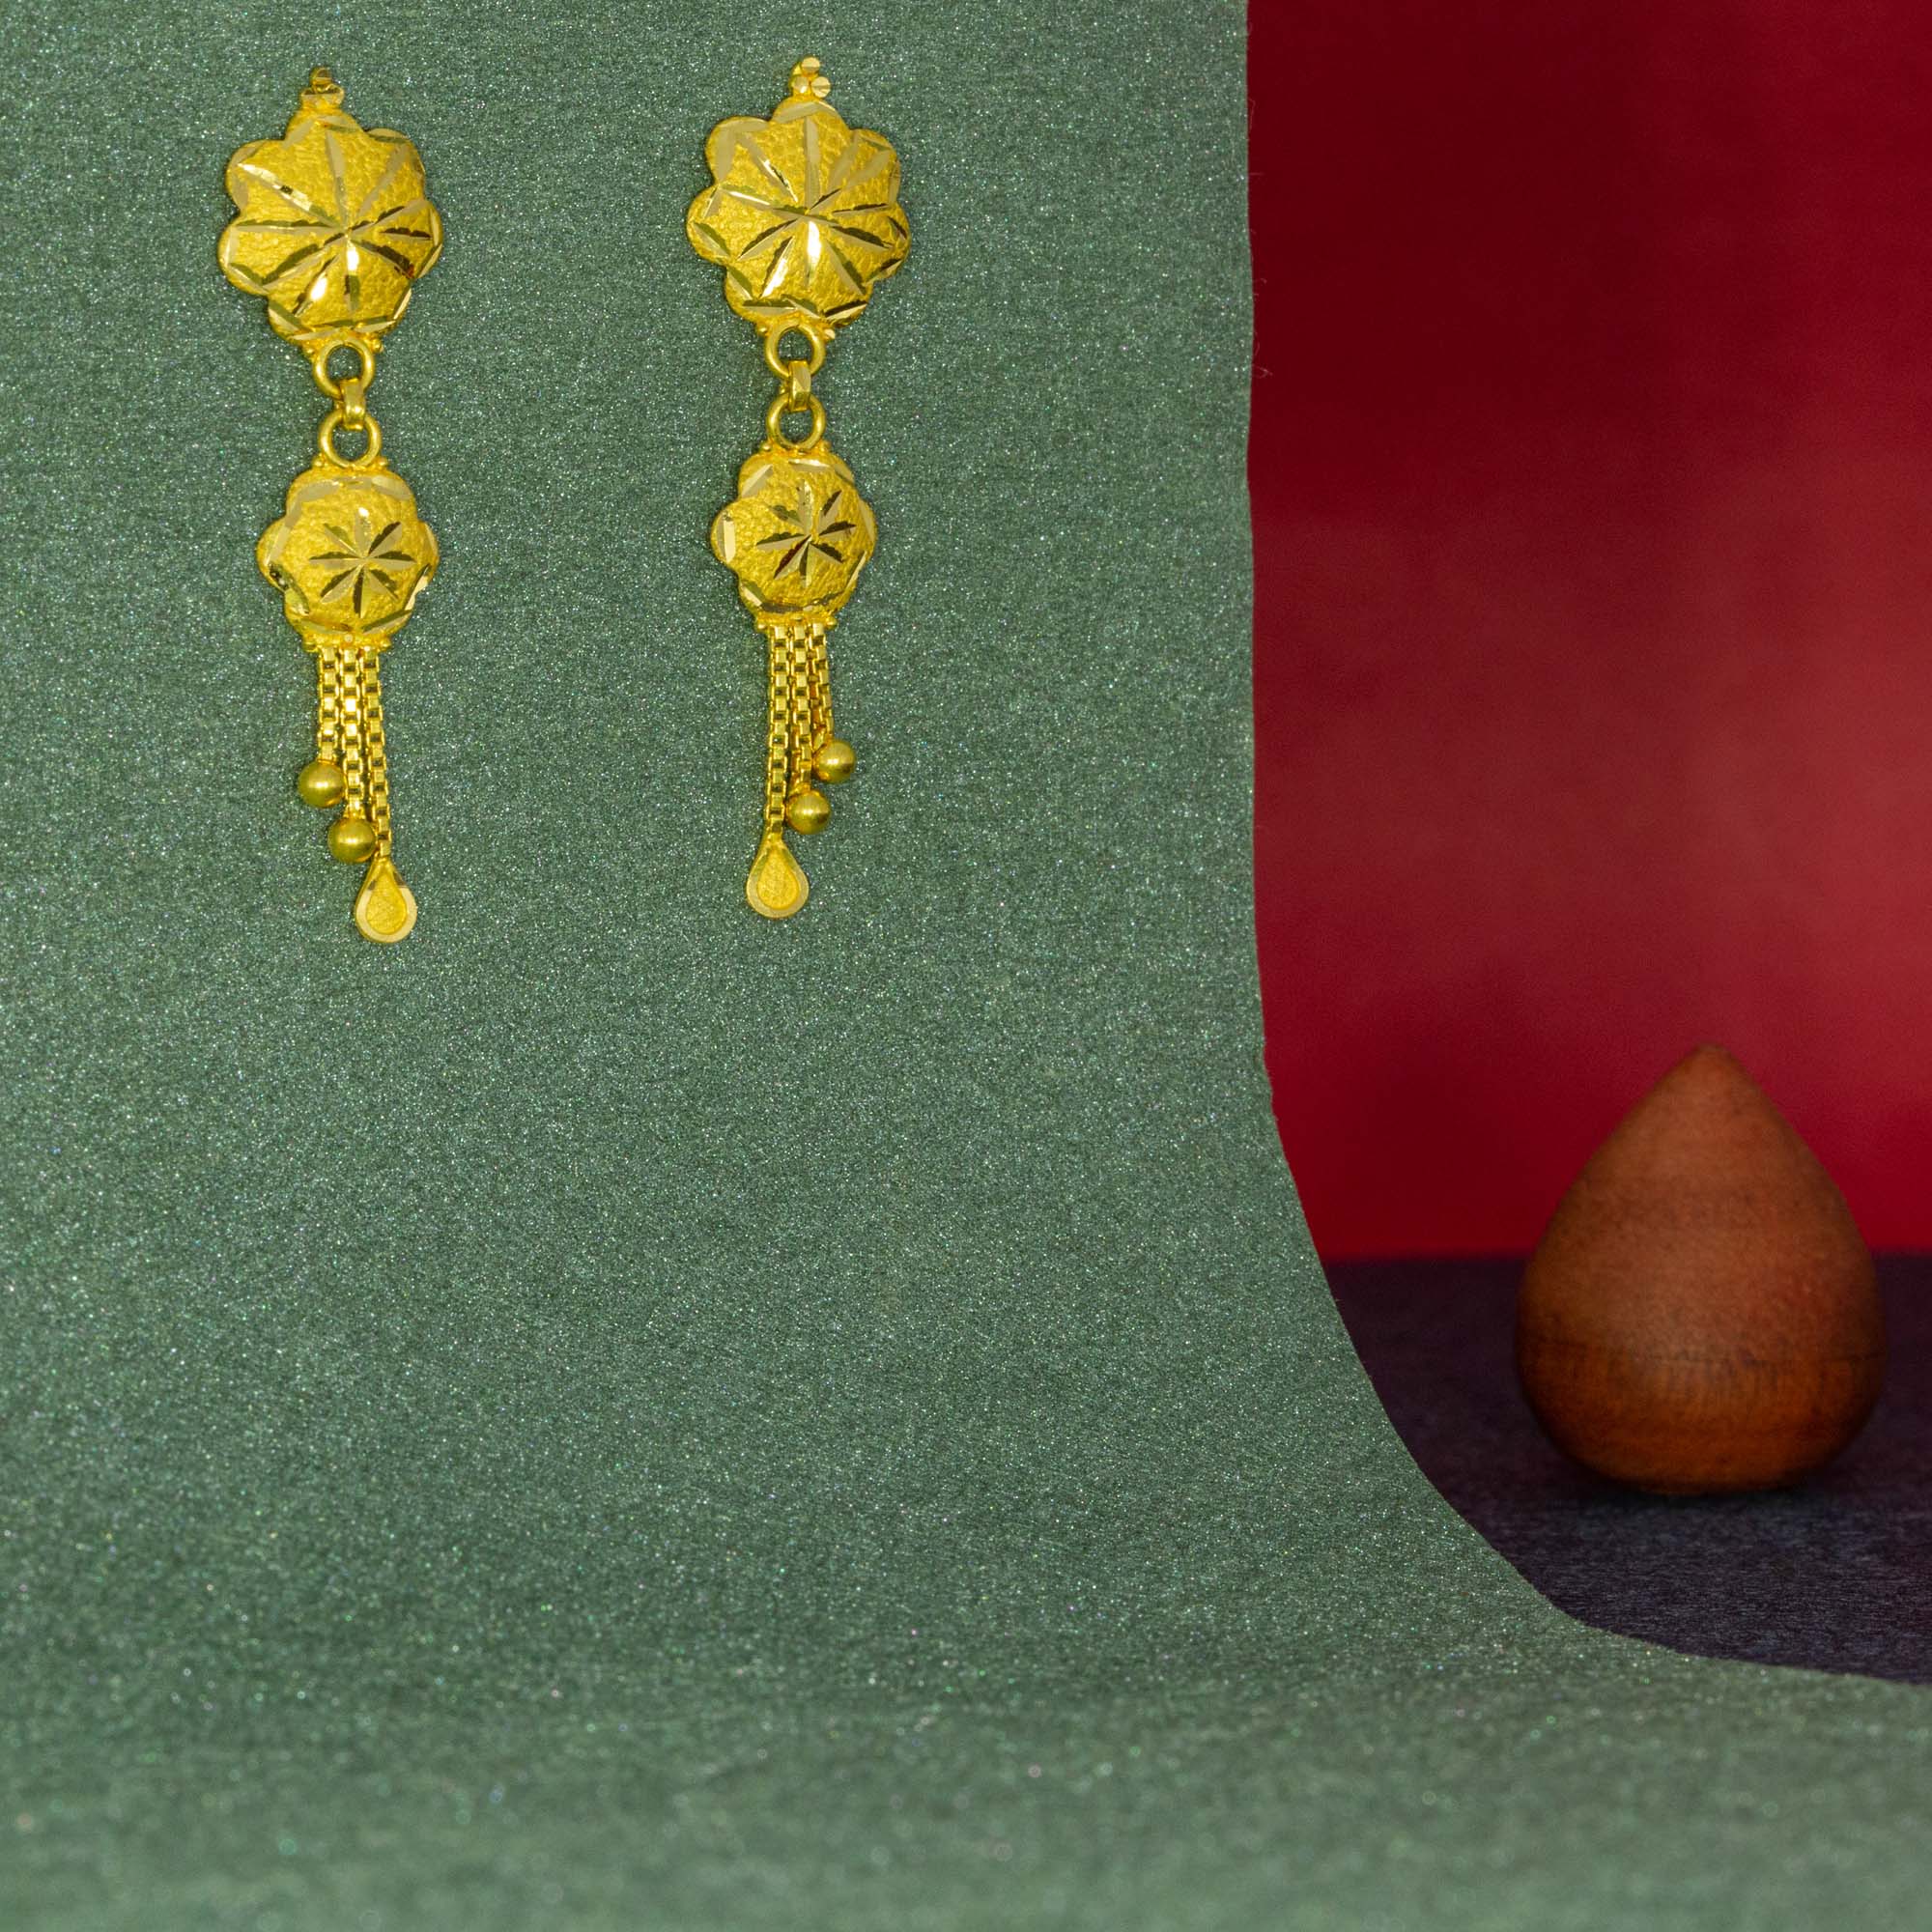 Enticing Sui Dhaga 3 Layer Gold Drop Earrings